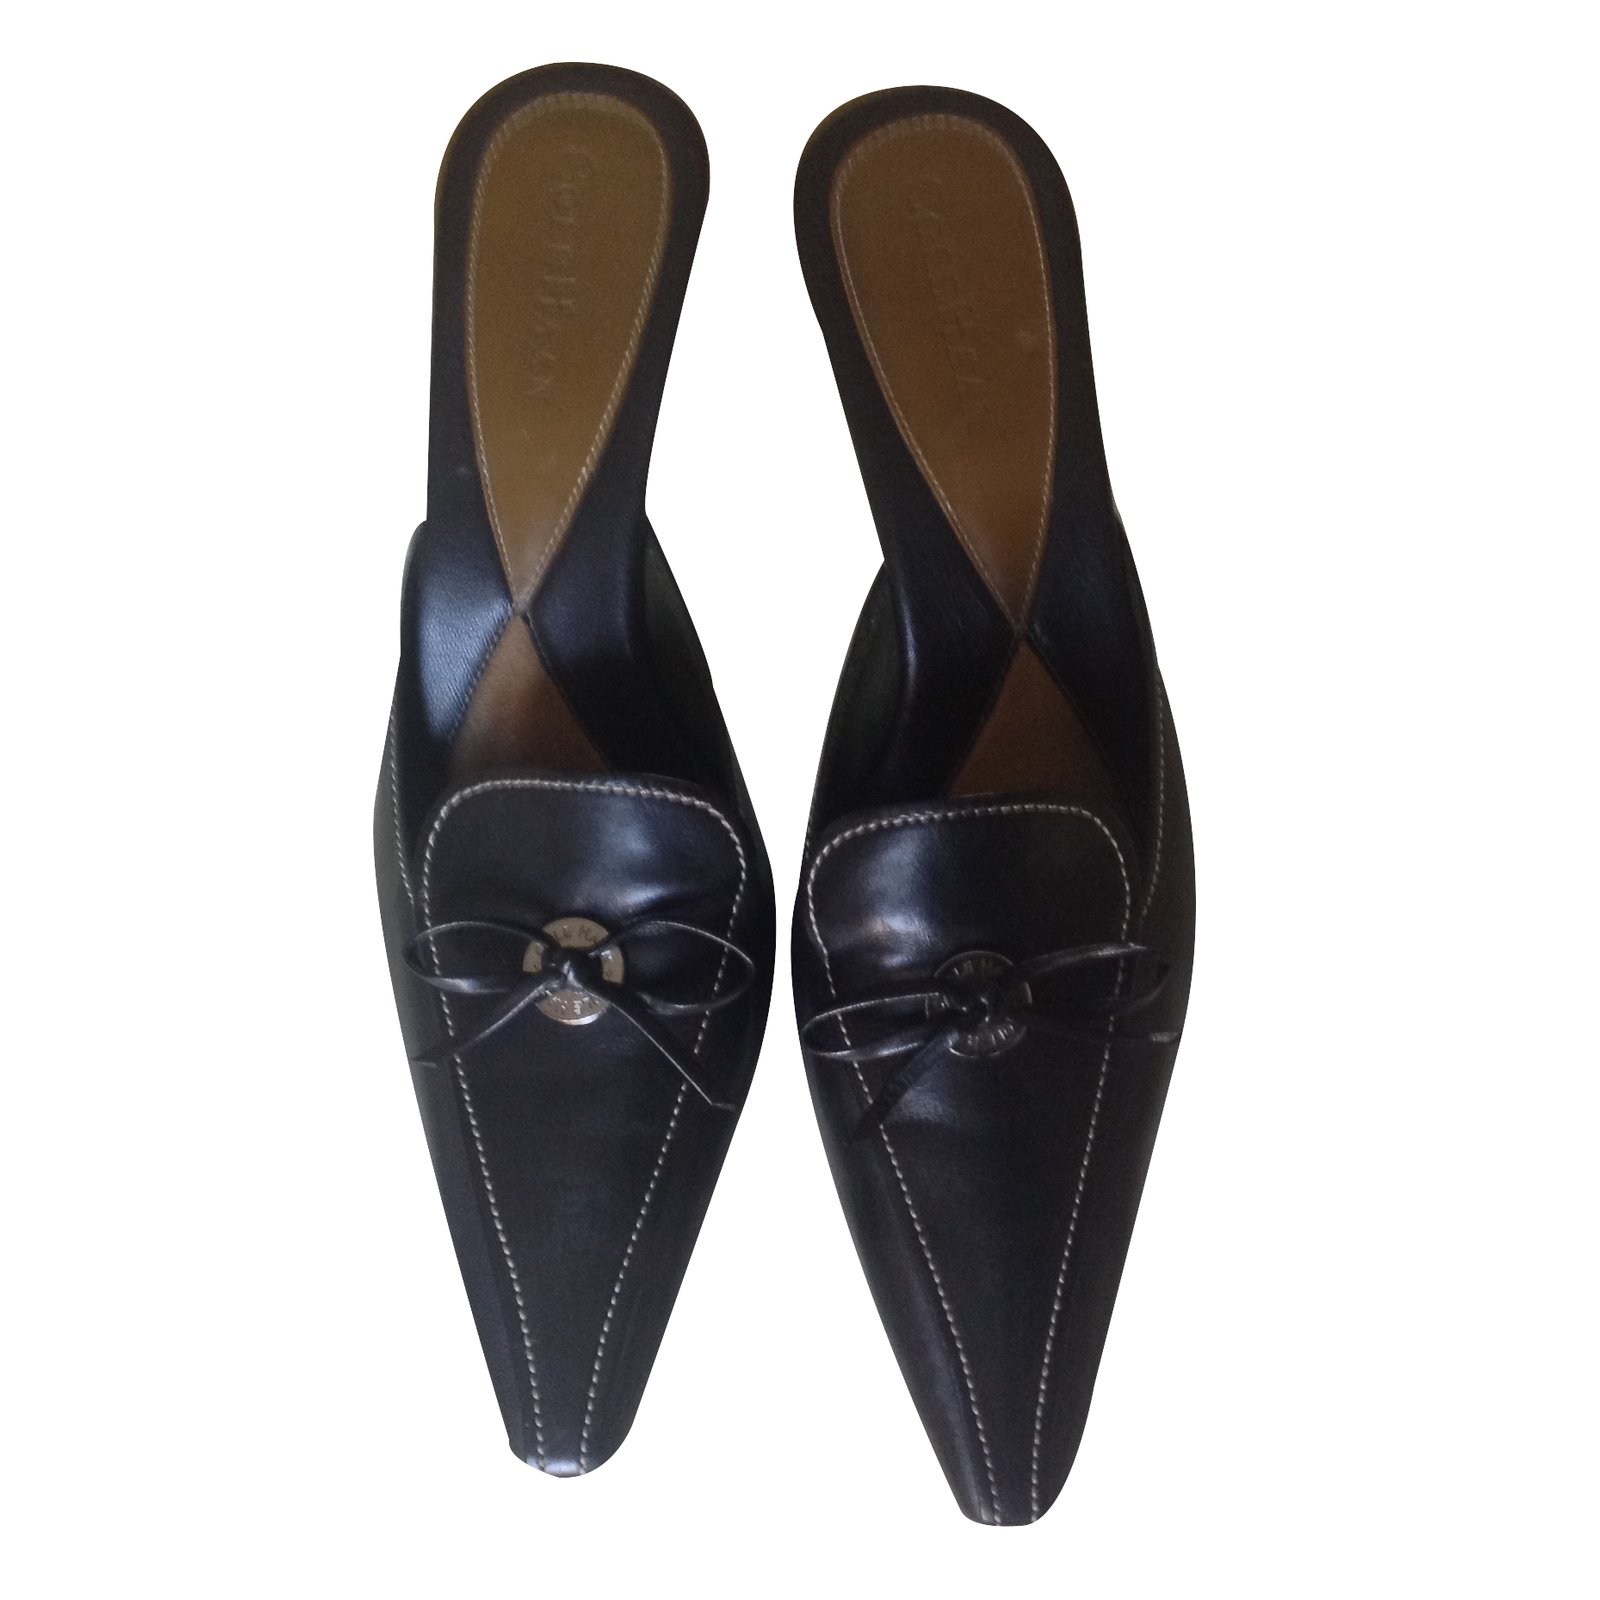 Cole Haan Mules Mules Leather Black ref 